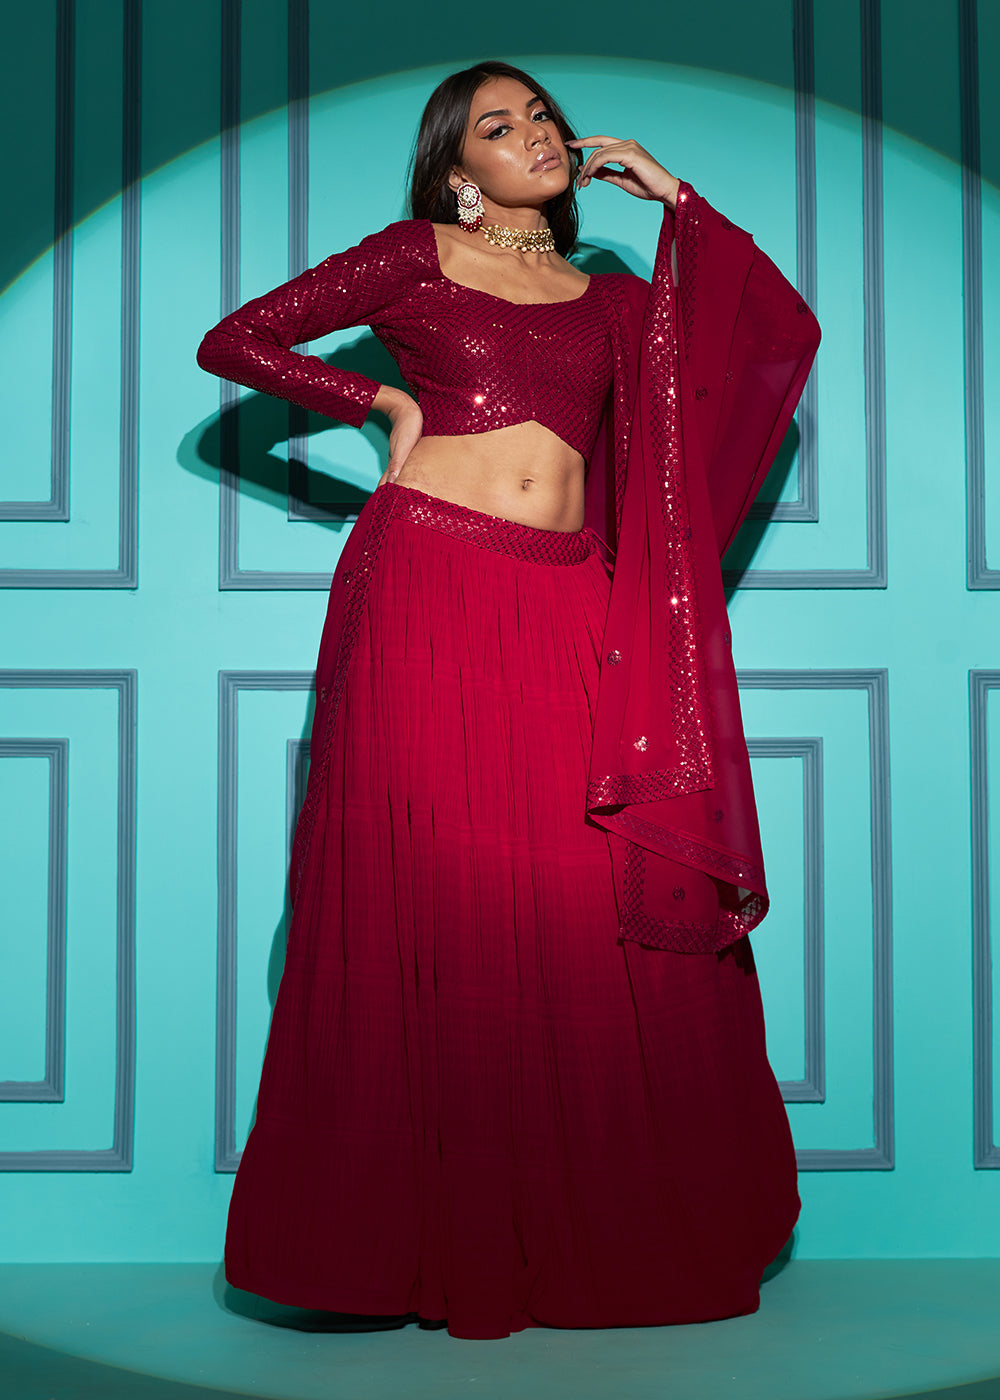 Buy Now Exquisite Red Georgette Wedding Party Lehenga Choli Online in USA, UK, Canada & Worldwide at Empress Clothing. 